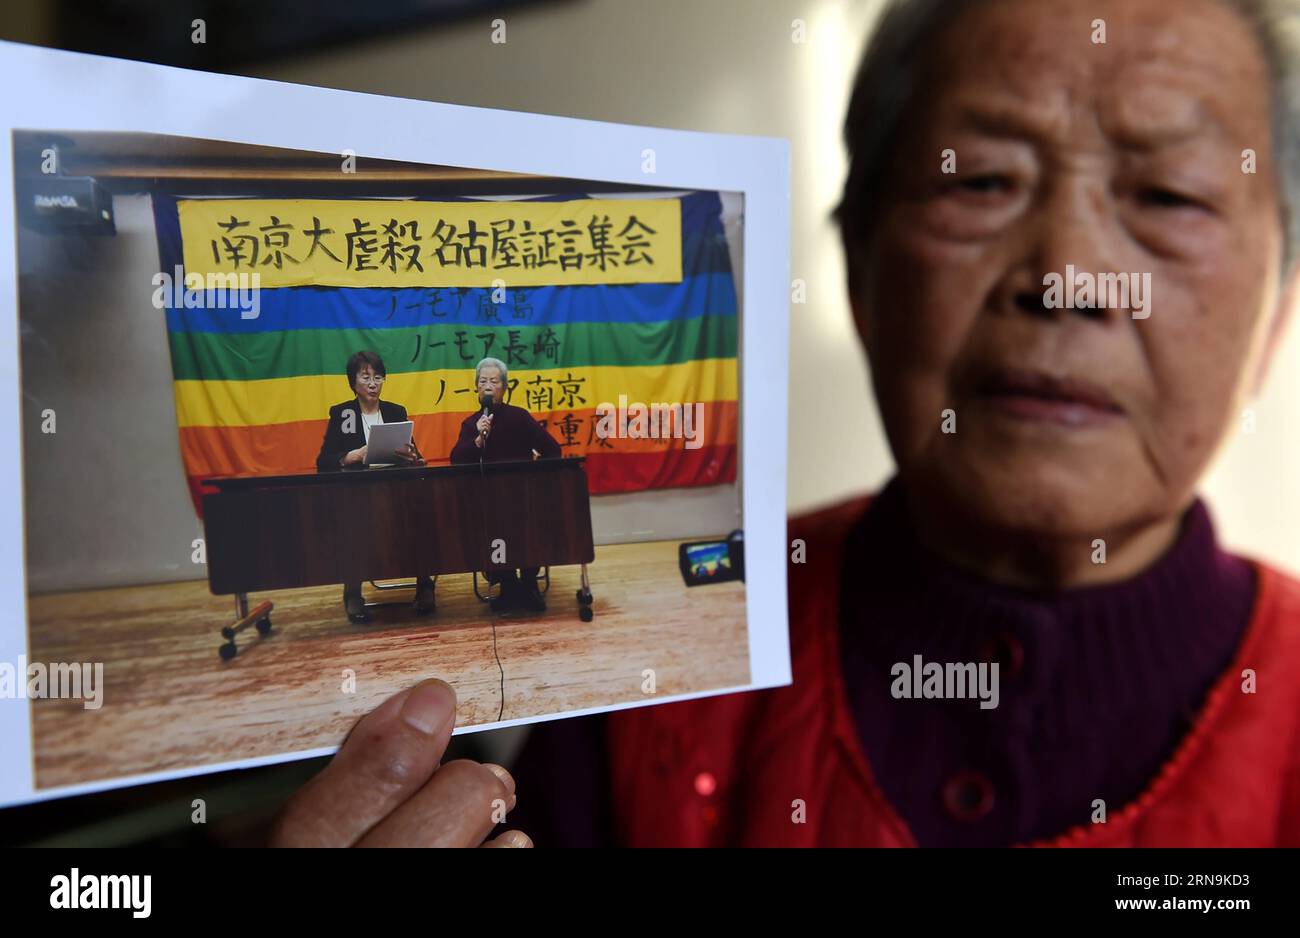 Ai Yiying, 87, survivor of the atrocious Nanjing Massacre, shows her photo at home in Nanjing, capital of east China s Jiangsu Province, on Dec. 3, 2015. Ai Yiying survived in the Nanjing Massacre when she was 9 years old. She witnessed in a hideout that her father Ai Renyin, her uncles Ai Renbing and Ai Renlin, her cousin Ai Yisheng were forced away and killed by Japanese army. Some survivors of the Nanjing Massacre held family memorial rites for their lost relatives at the Memorial Hall of the Victims in the Nanjing Massacre by Japanese Invaders, ahead of the national memorial day for the at Stock Photo